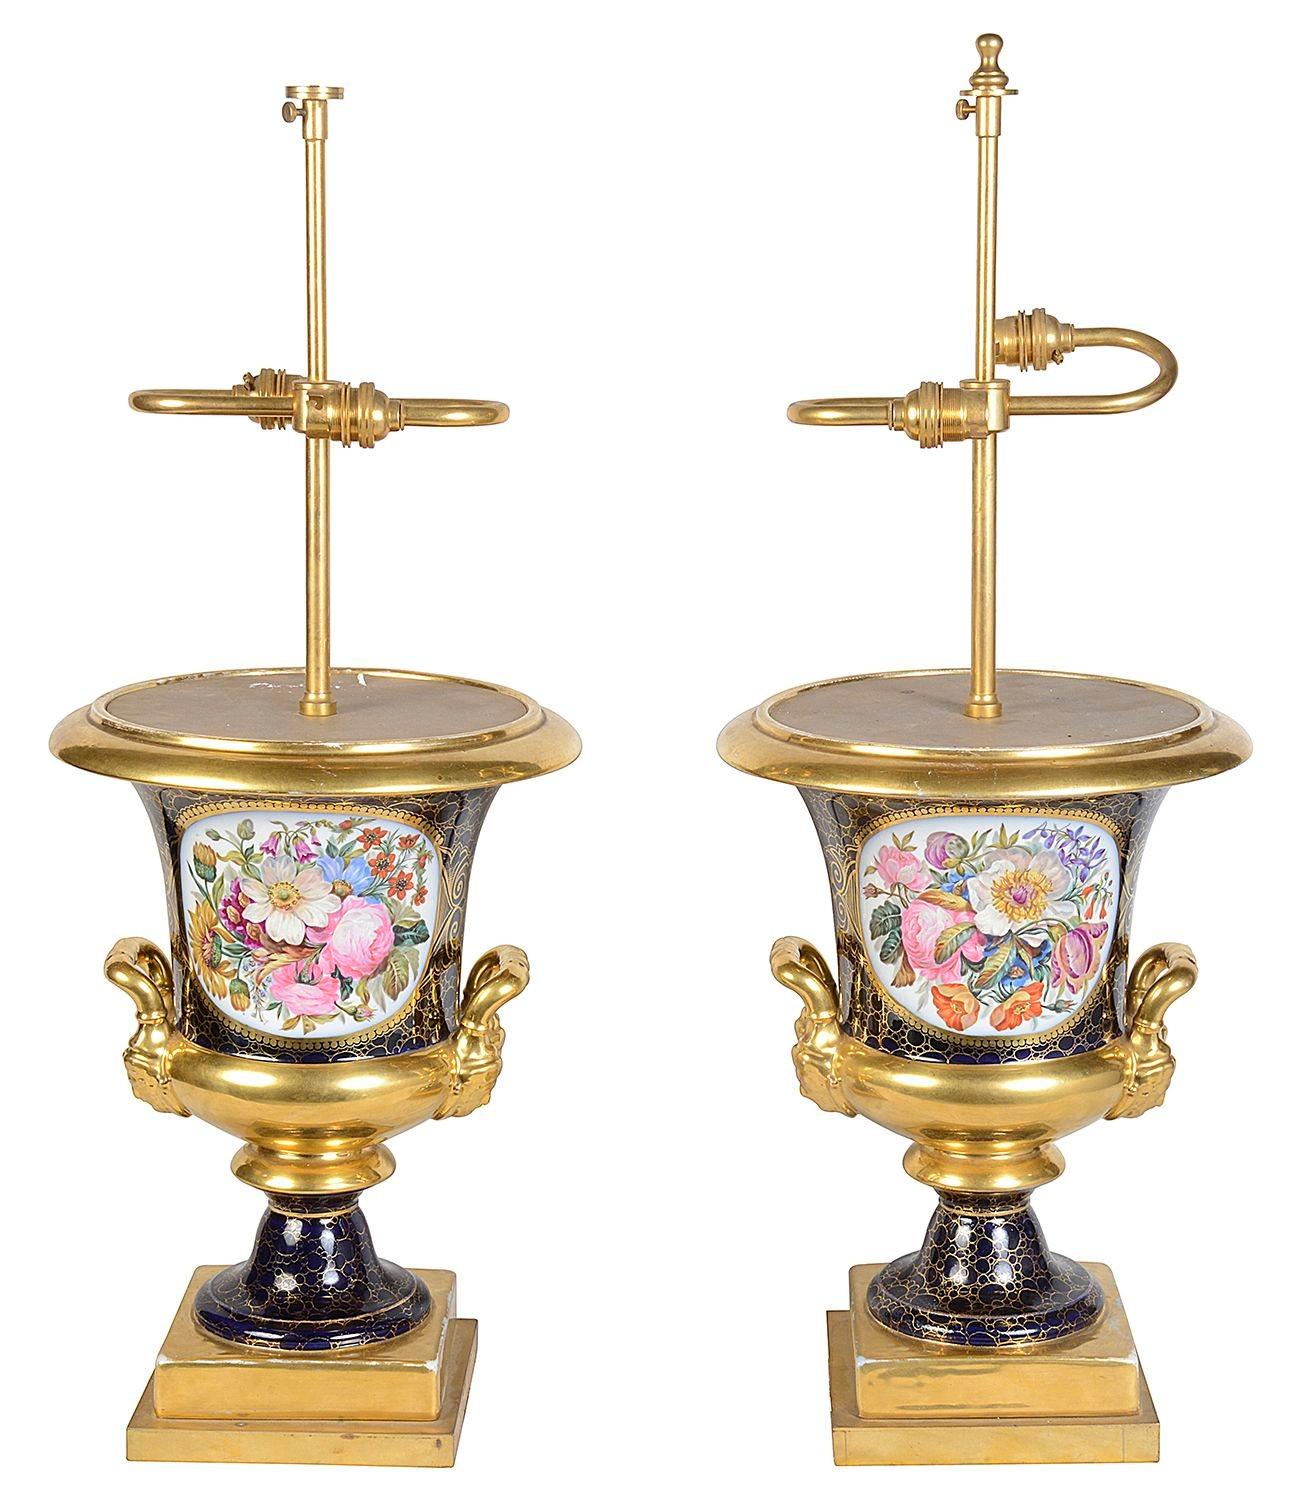 An impressive and decorative pair of French Sevres style porcelain lamps, each with wonderful colourful inset hand painted floral scenes, armoral crests to the reverse. Cobalt blue ground and gilded mouldings and handles.

Batch 78 G204/23 YNKZ